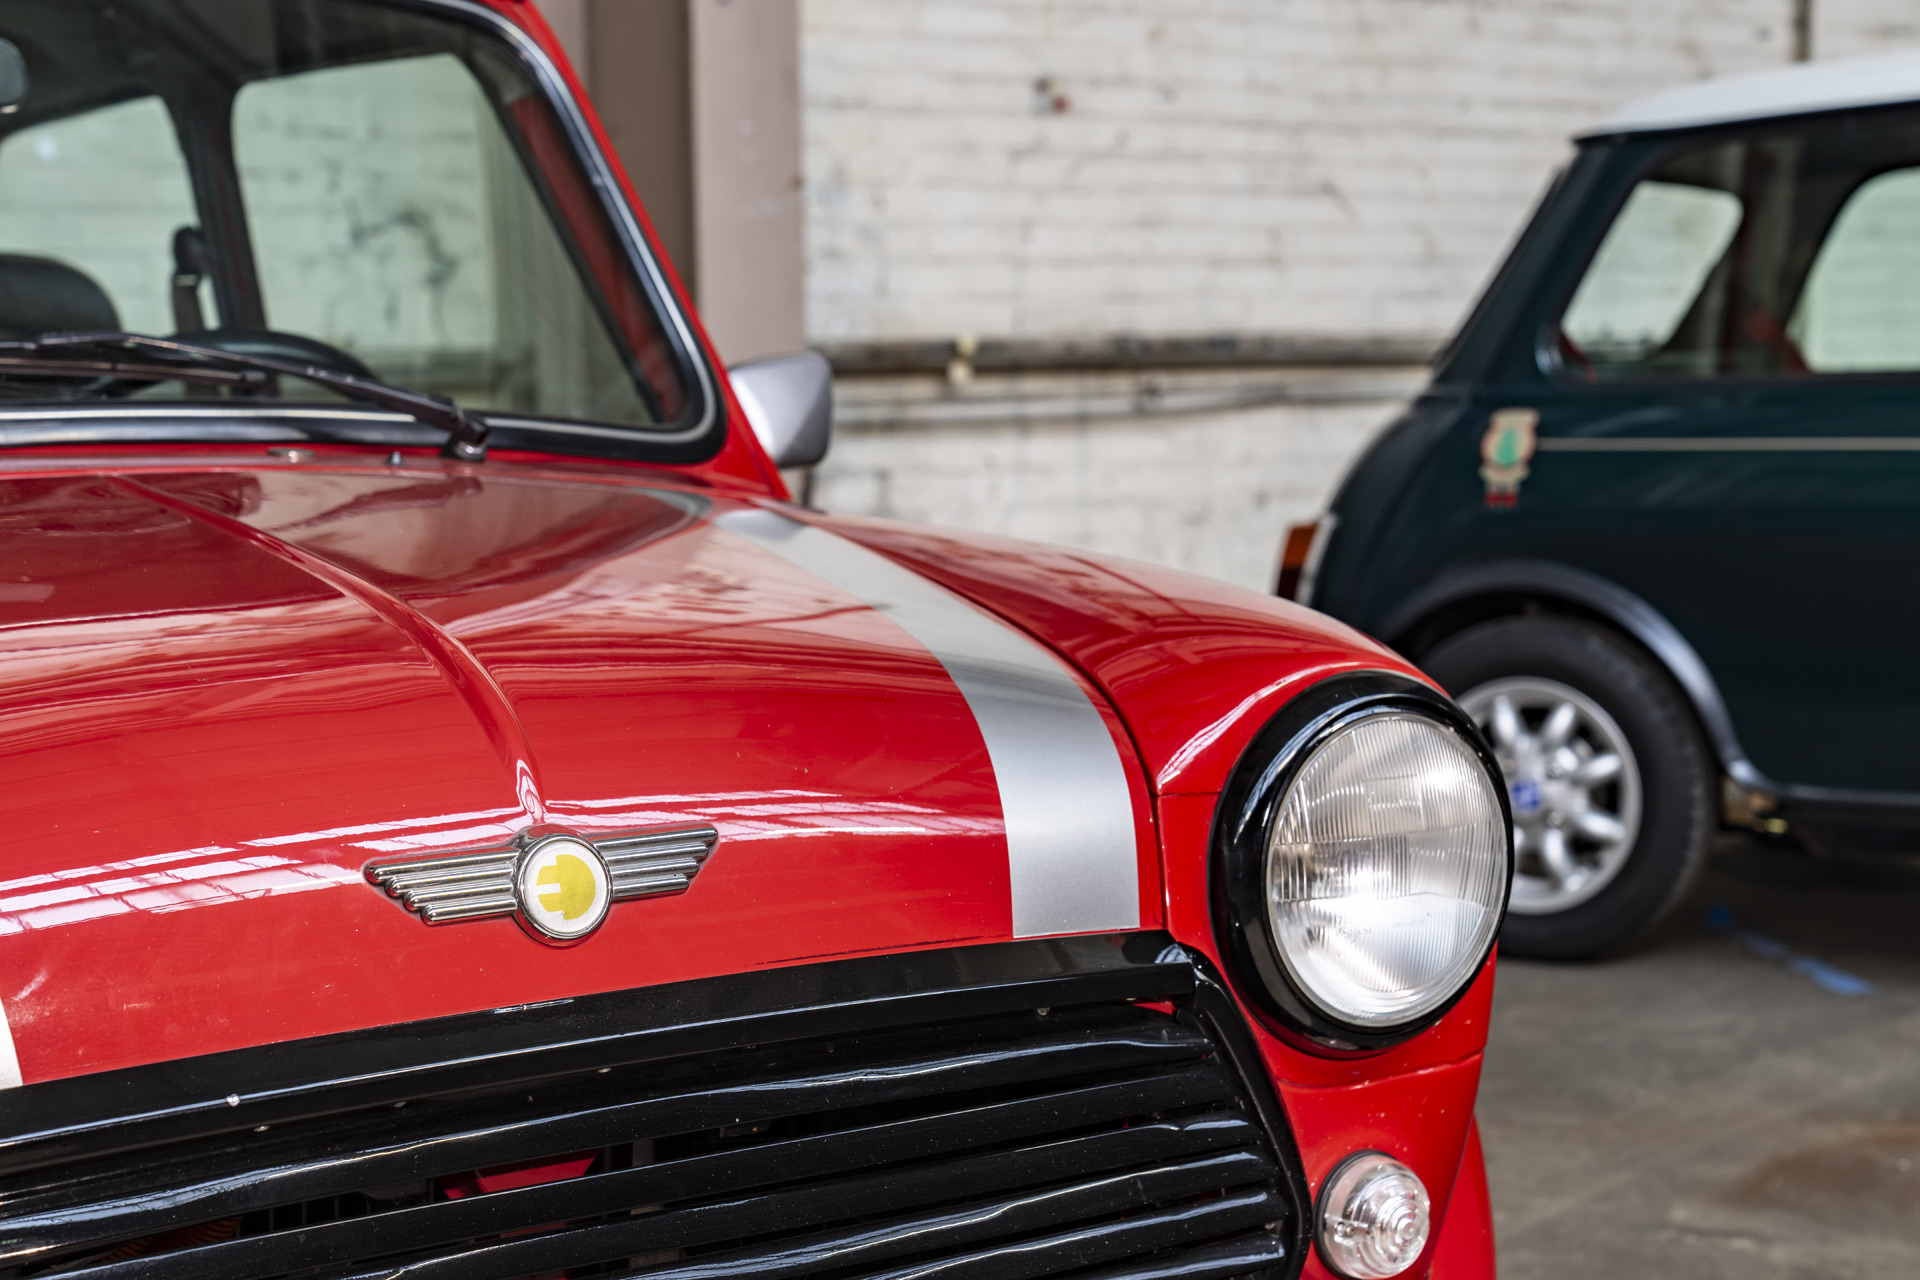 Mini Recharged is converting classic Minis to EVs with "bespoke upcycling" programMini Recharged is converting classic Minis to EVs with "bespoke upcycling" program